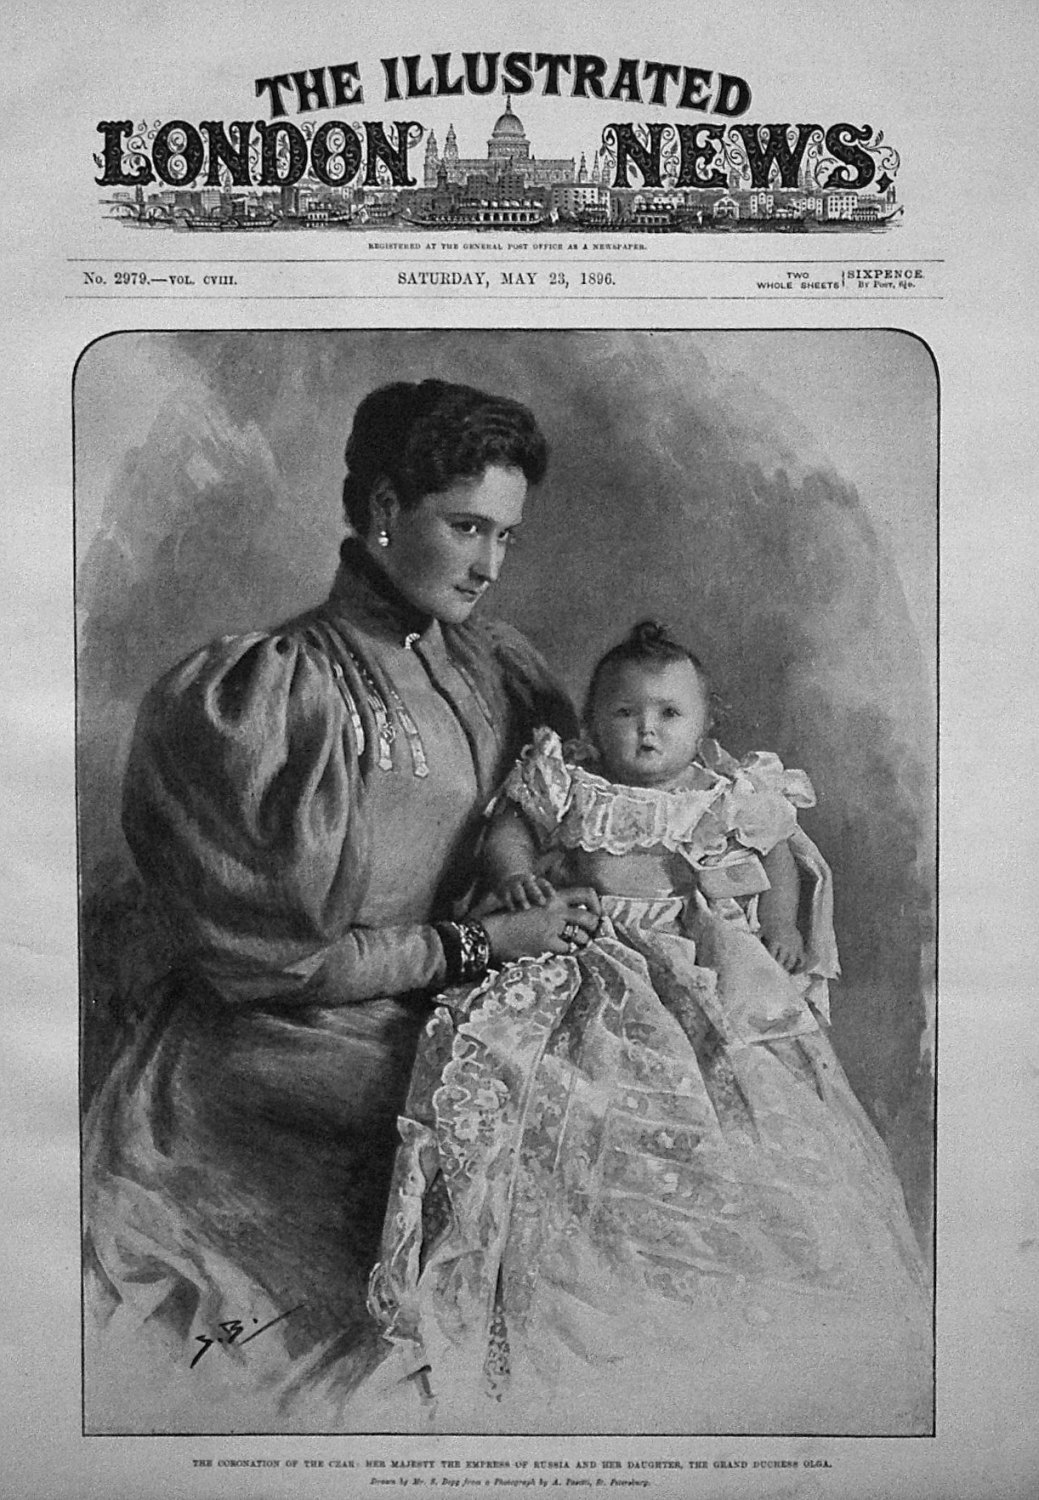 The Coronation of the Czar : Her Majesty the Empress of Russia and Her Daug